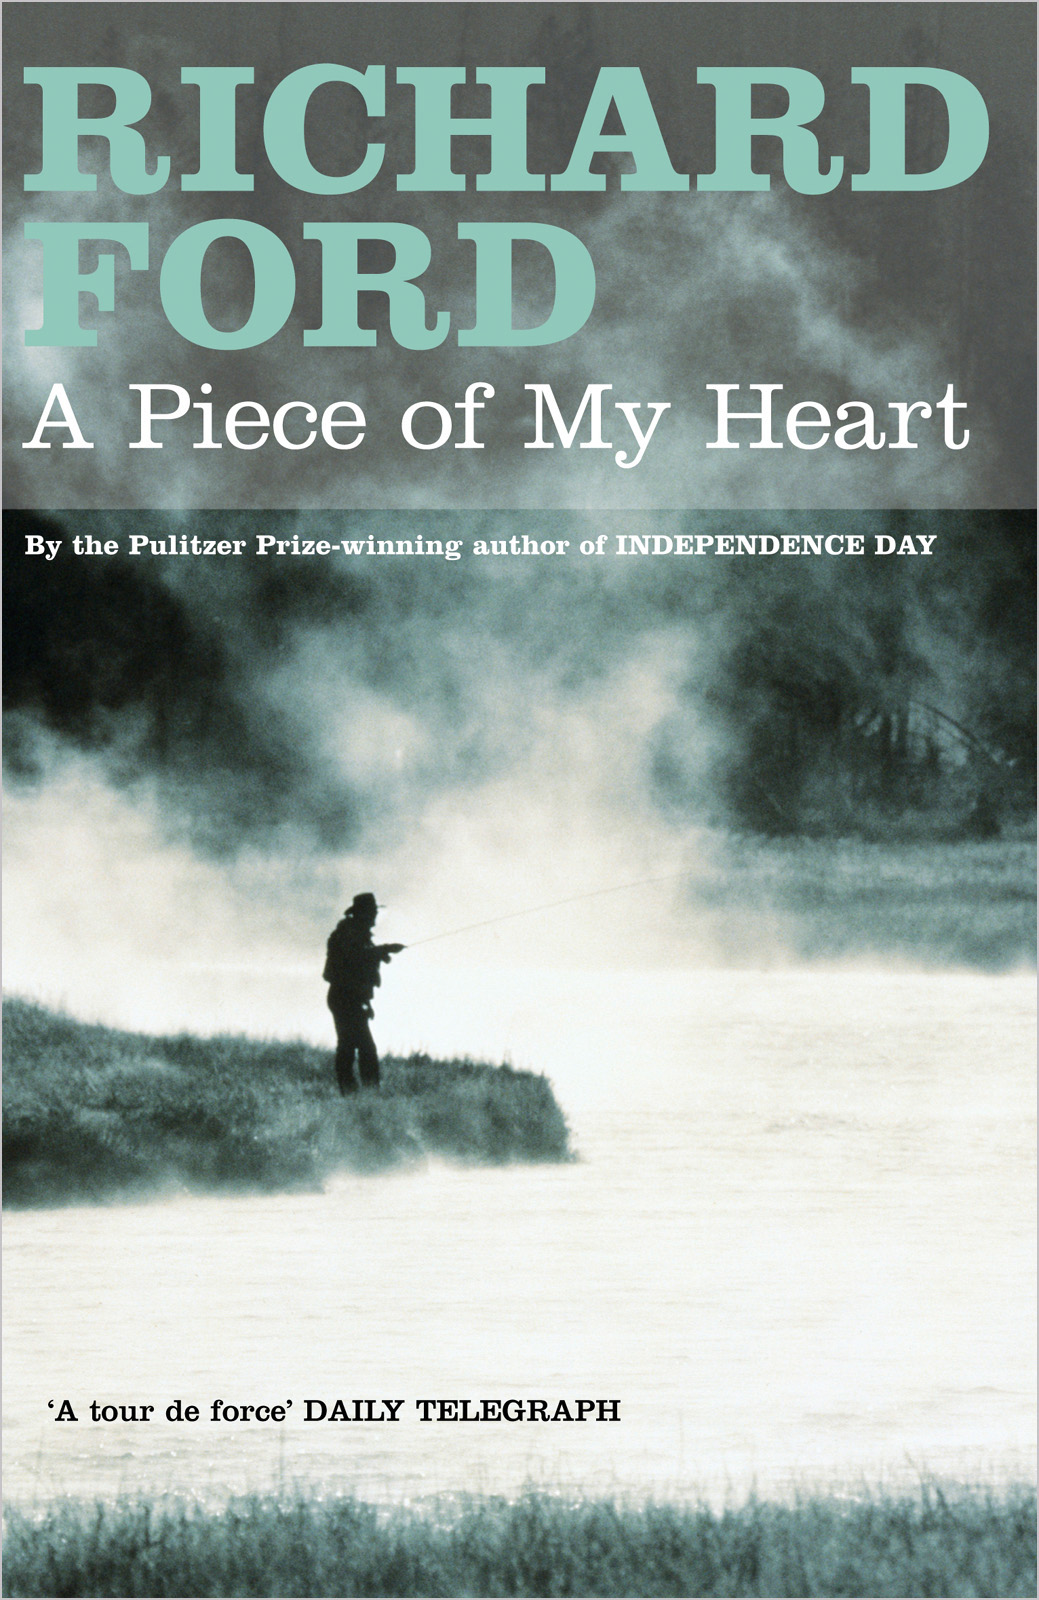 A Piece of My Heart (1976) by Richard Ford